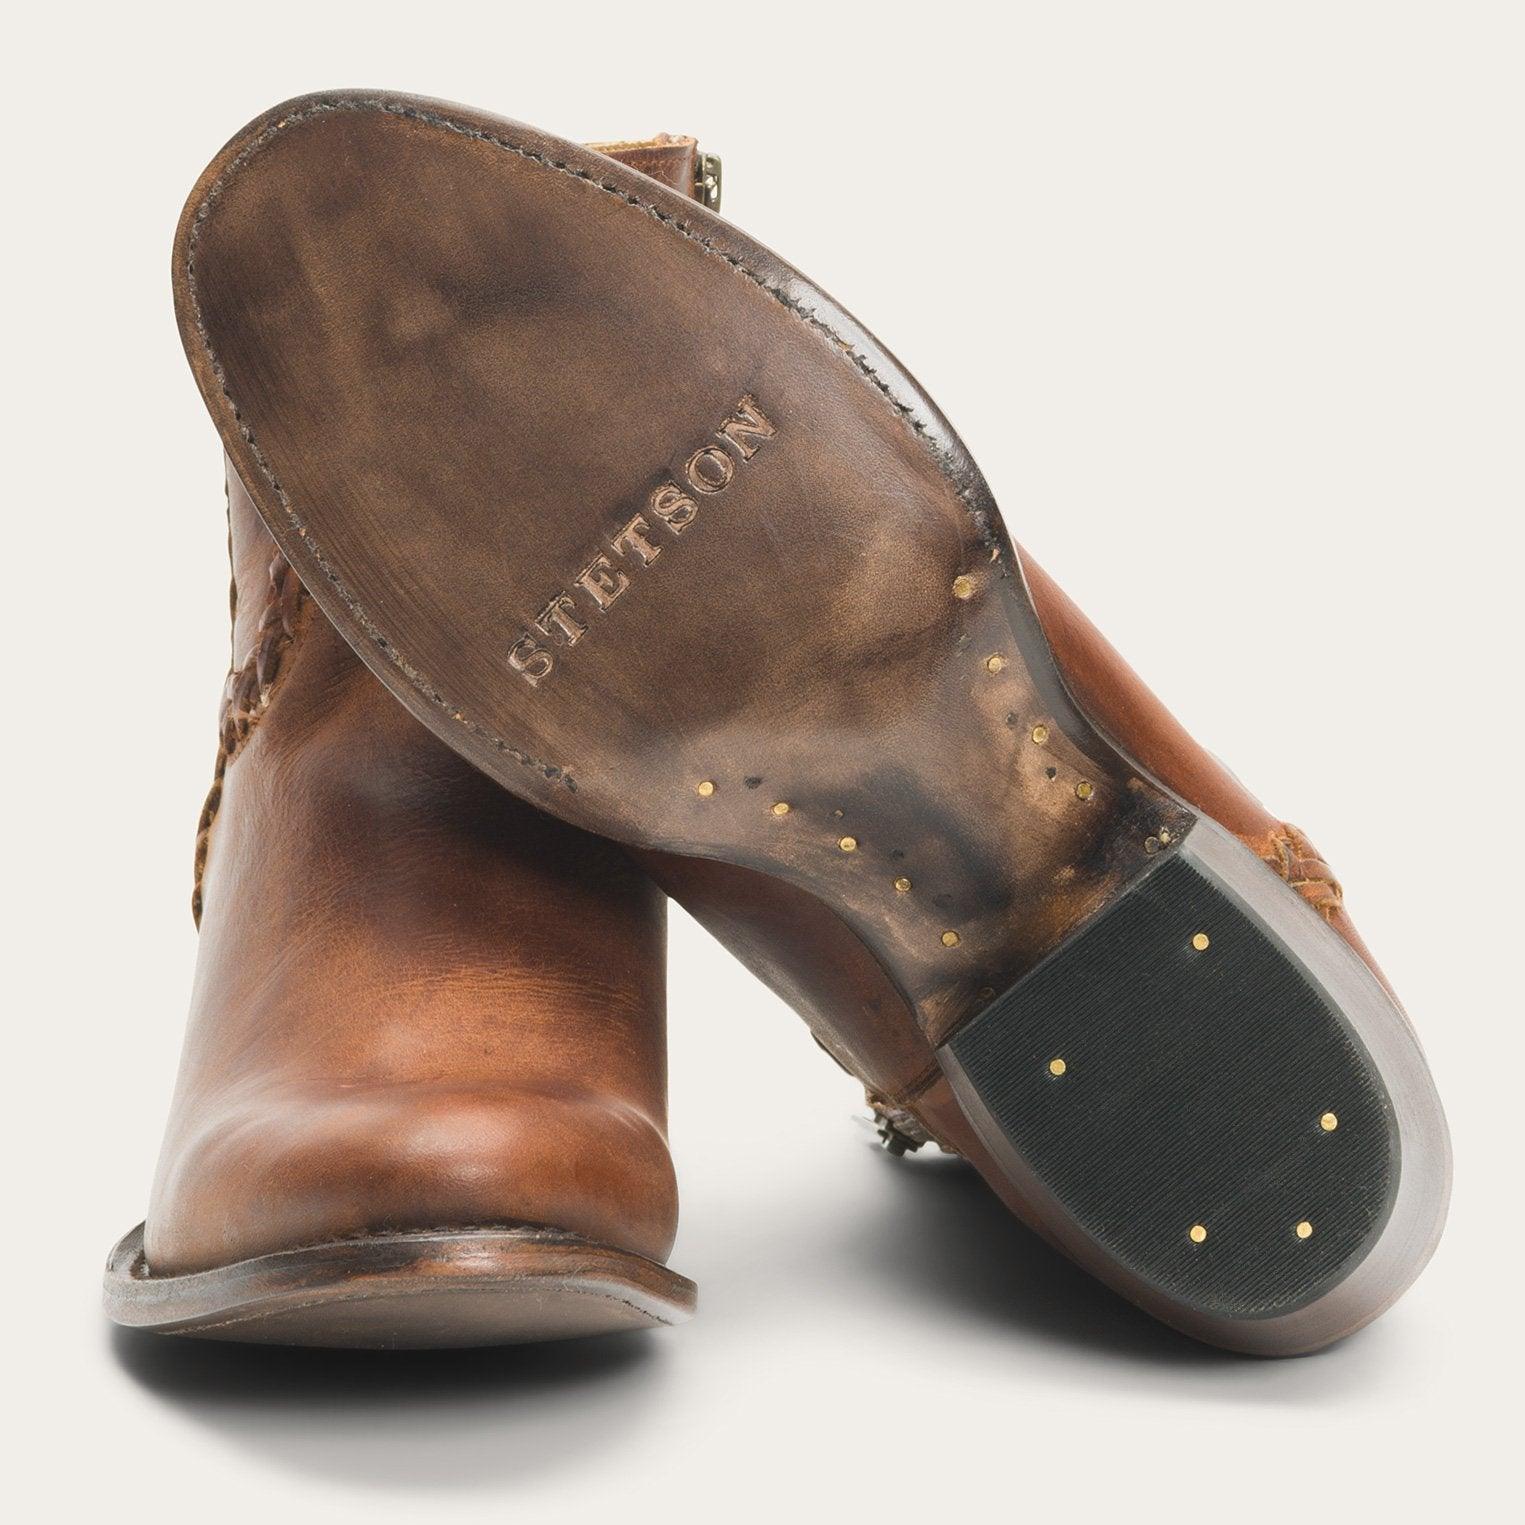 Stetson Pixie Brown Boots - Flyclothing LLC